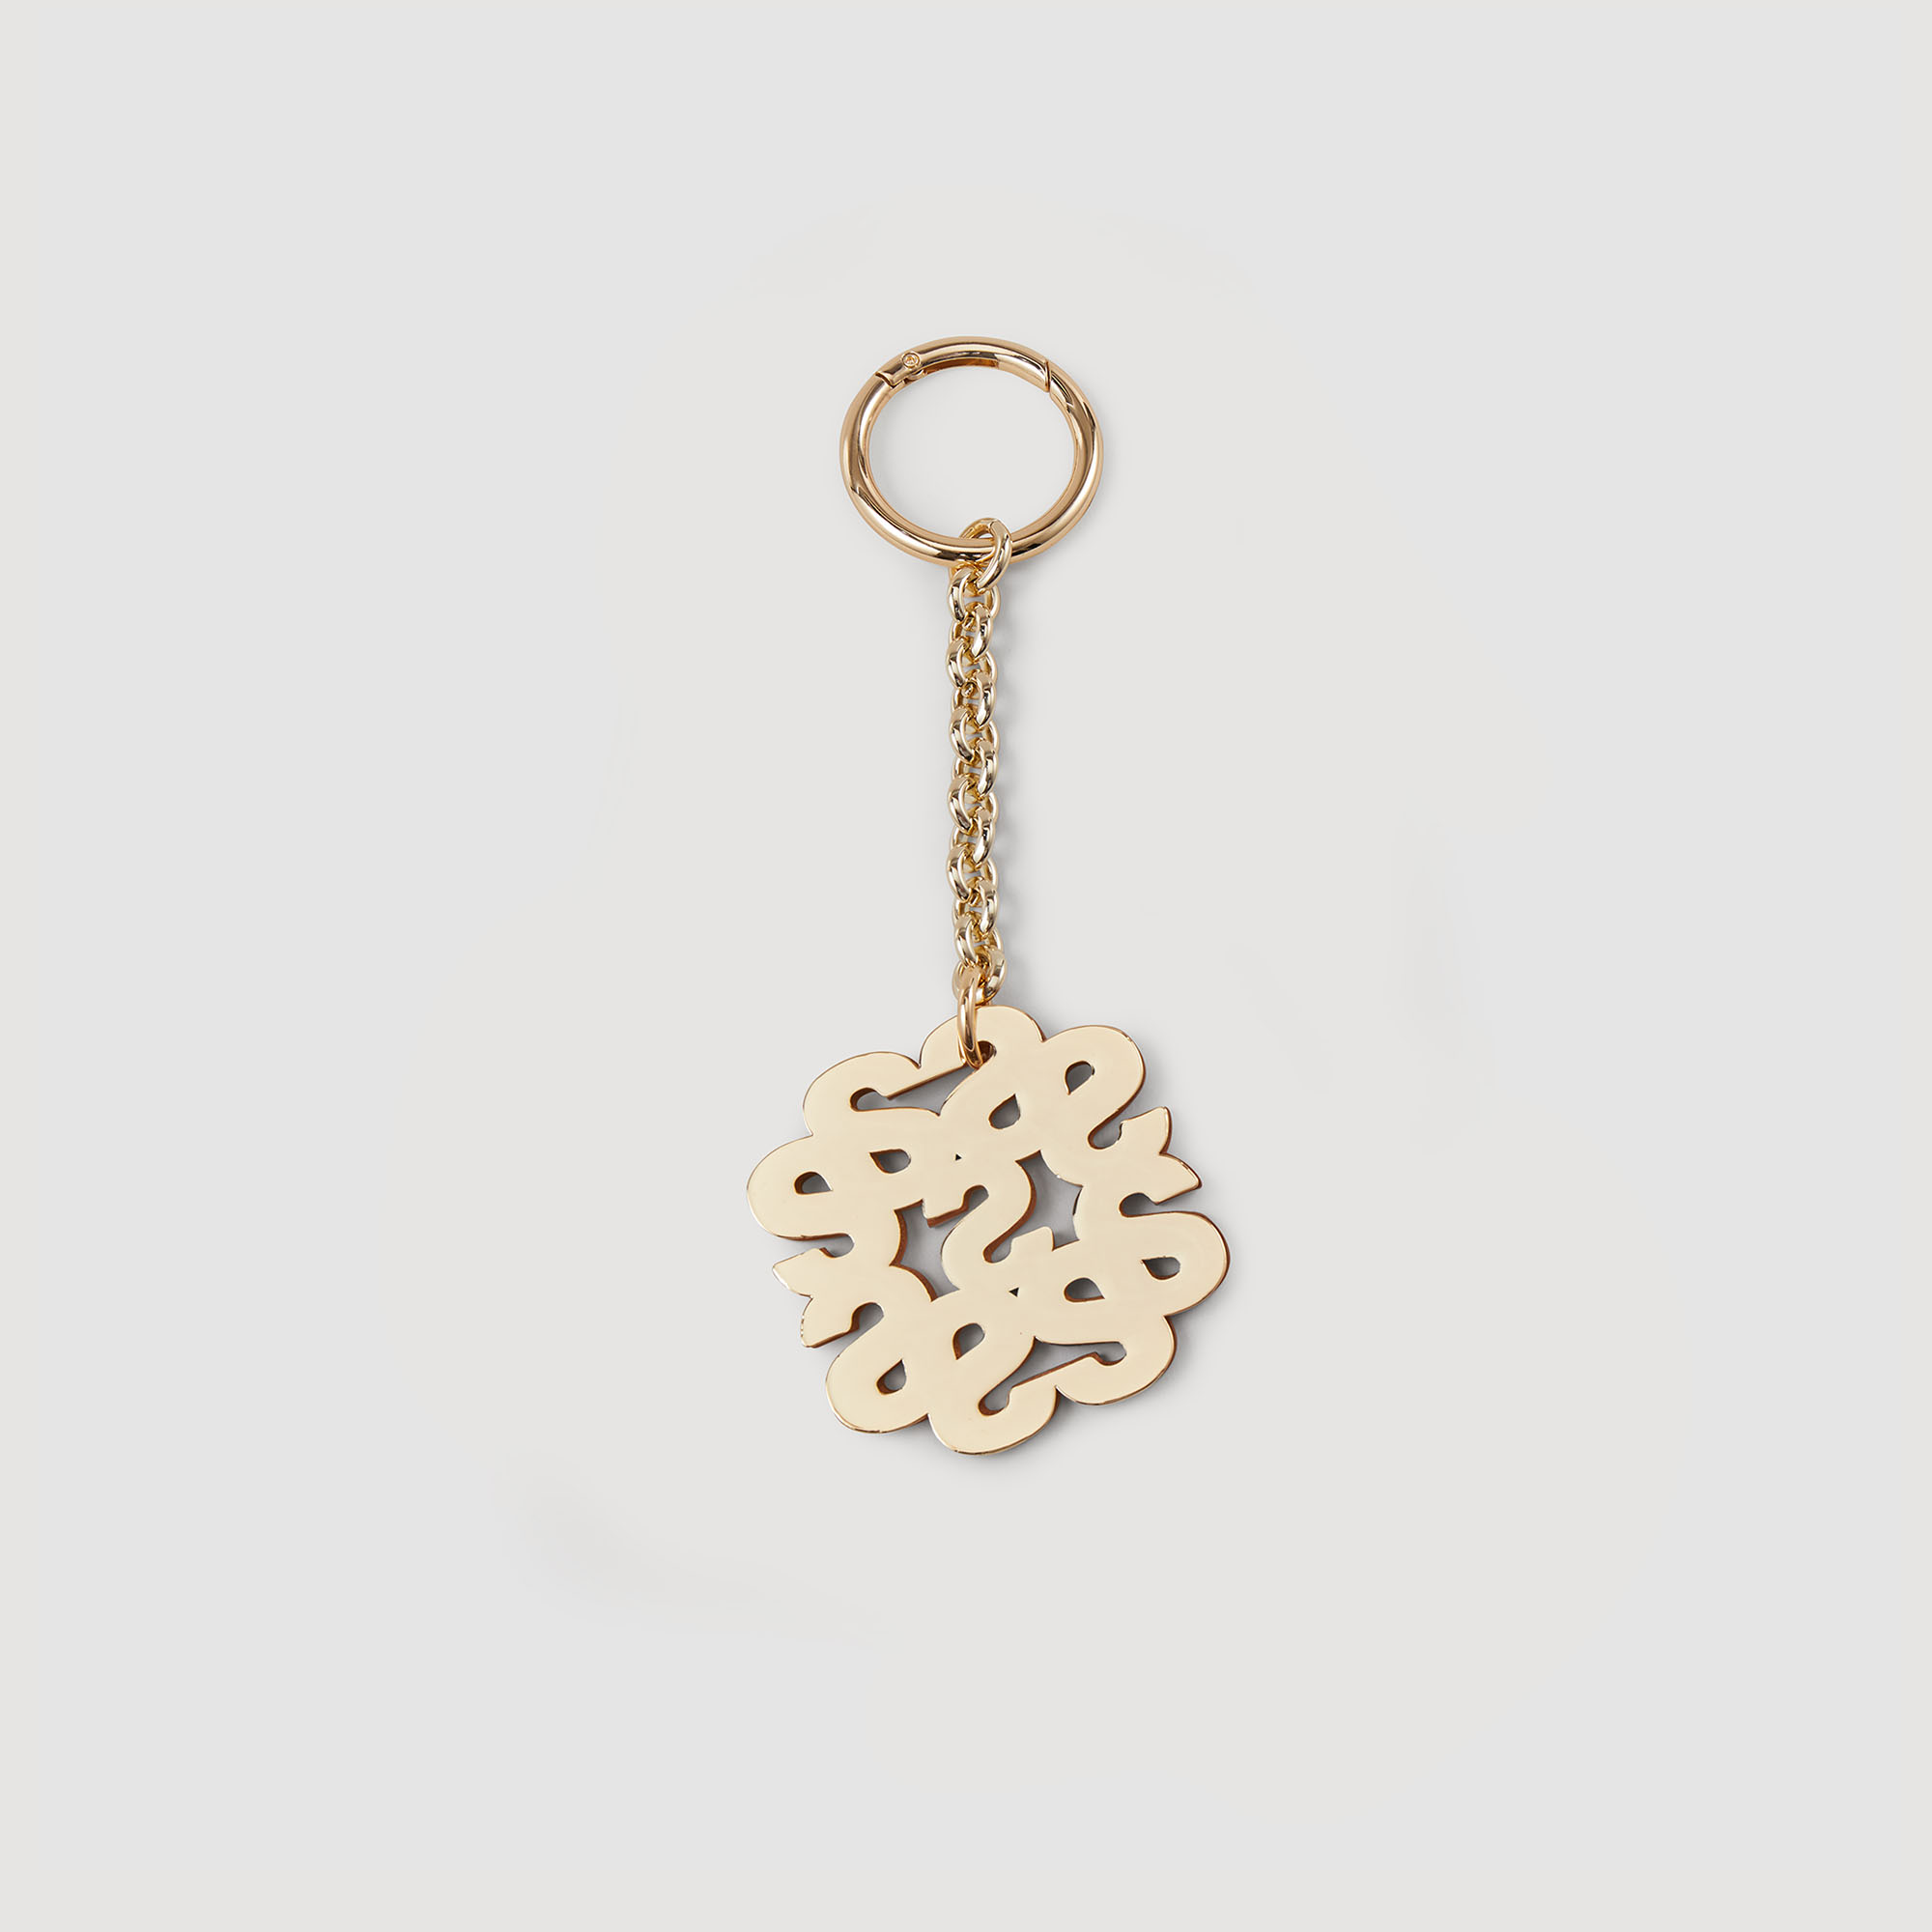 Sandro zinc Leather: Leather keyring with multi-S motif and metal ring